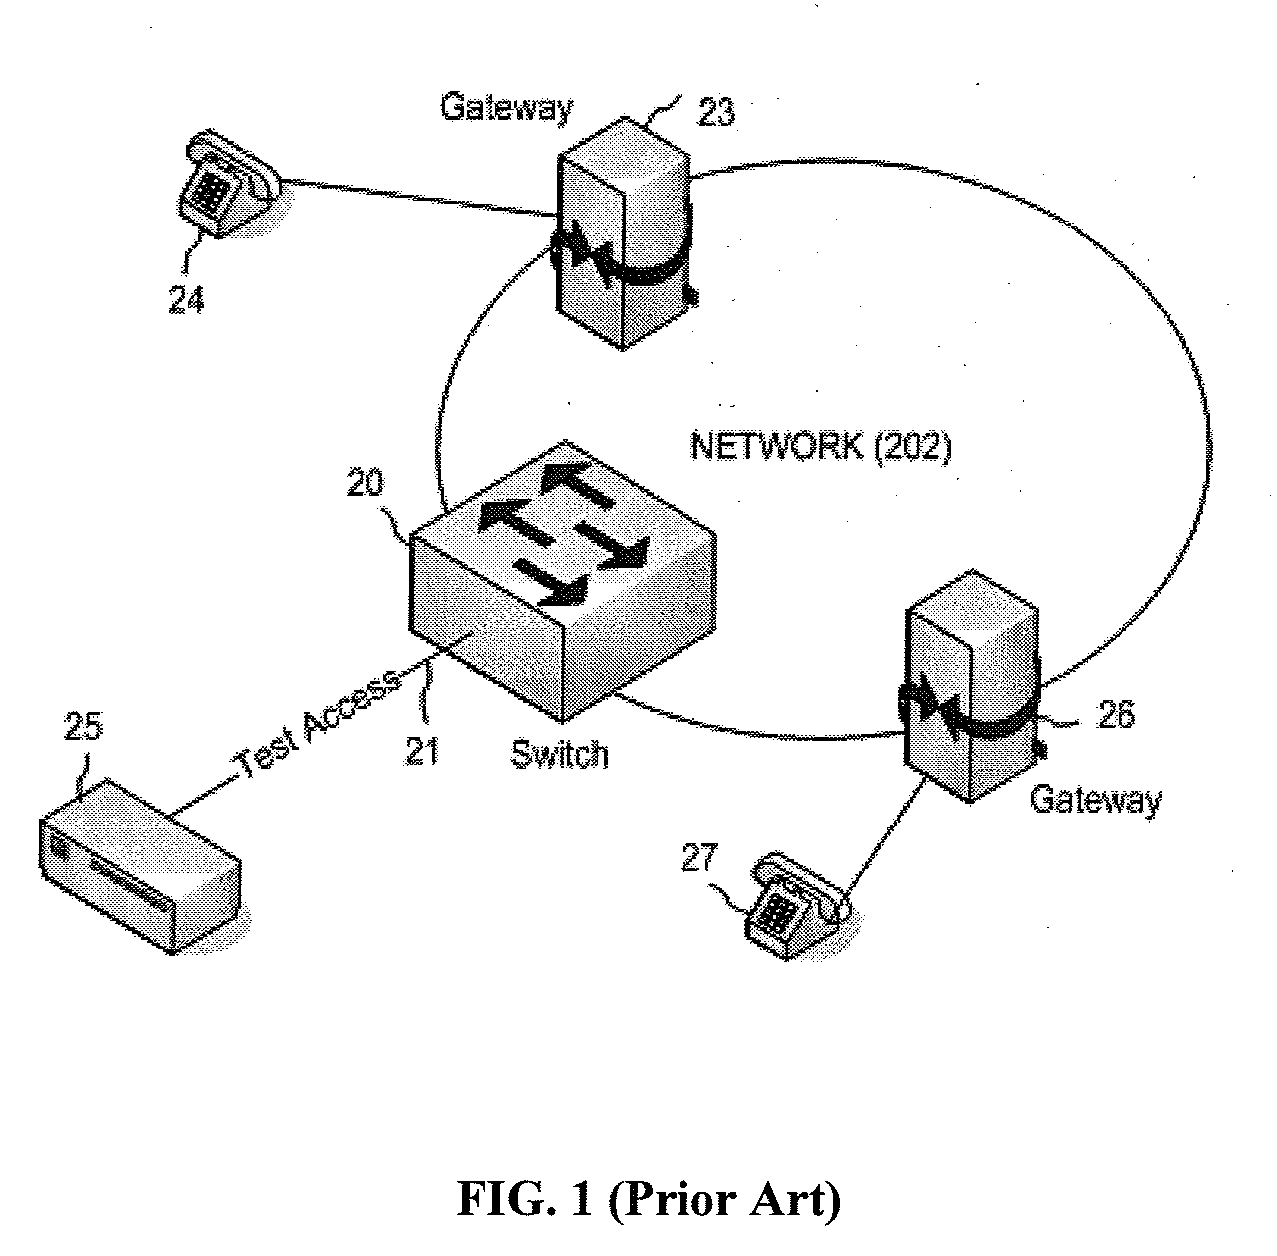 Transmission Quality Monitoring For Multimedia Streams